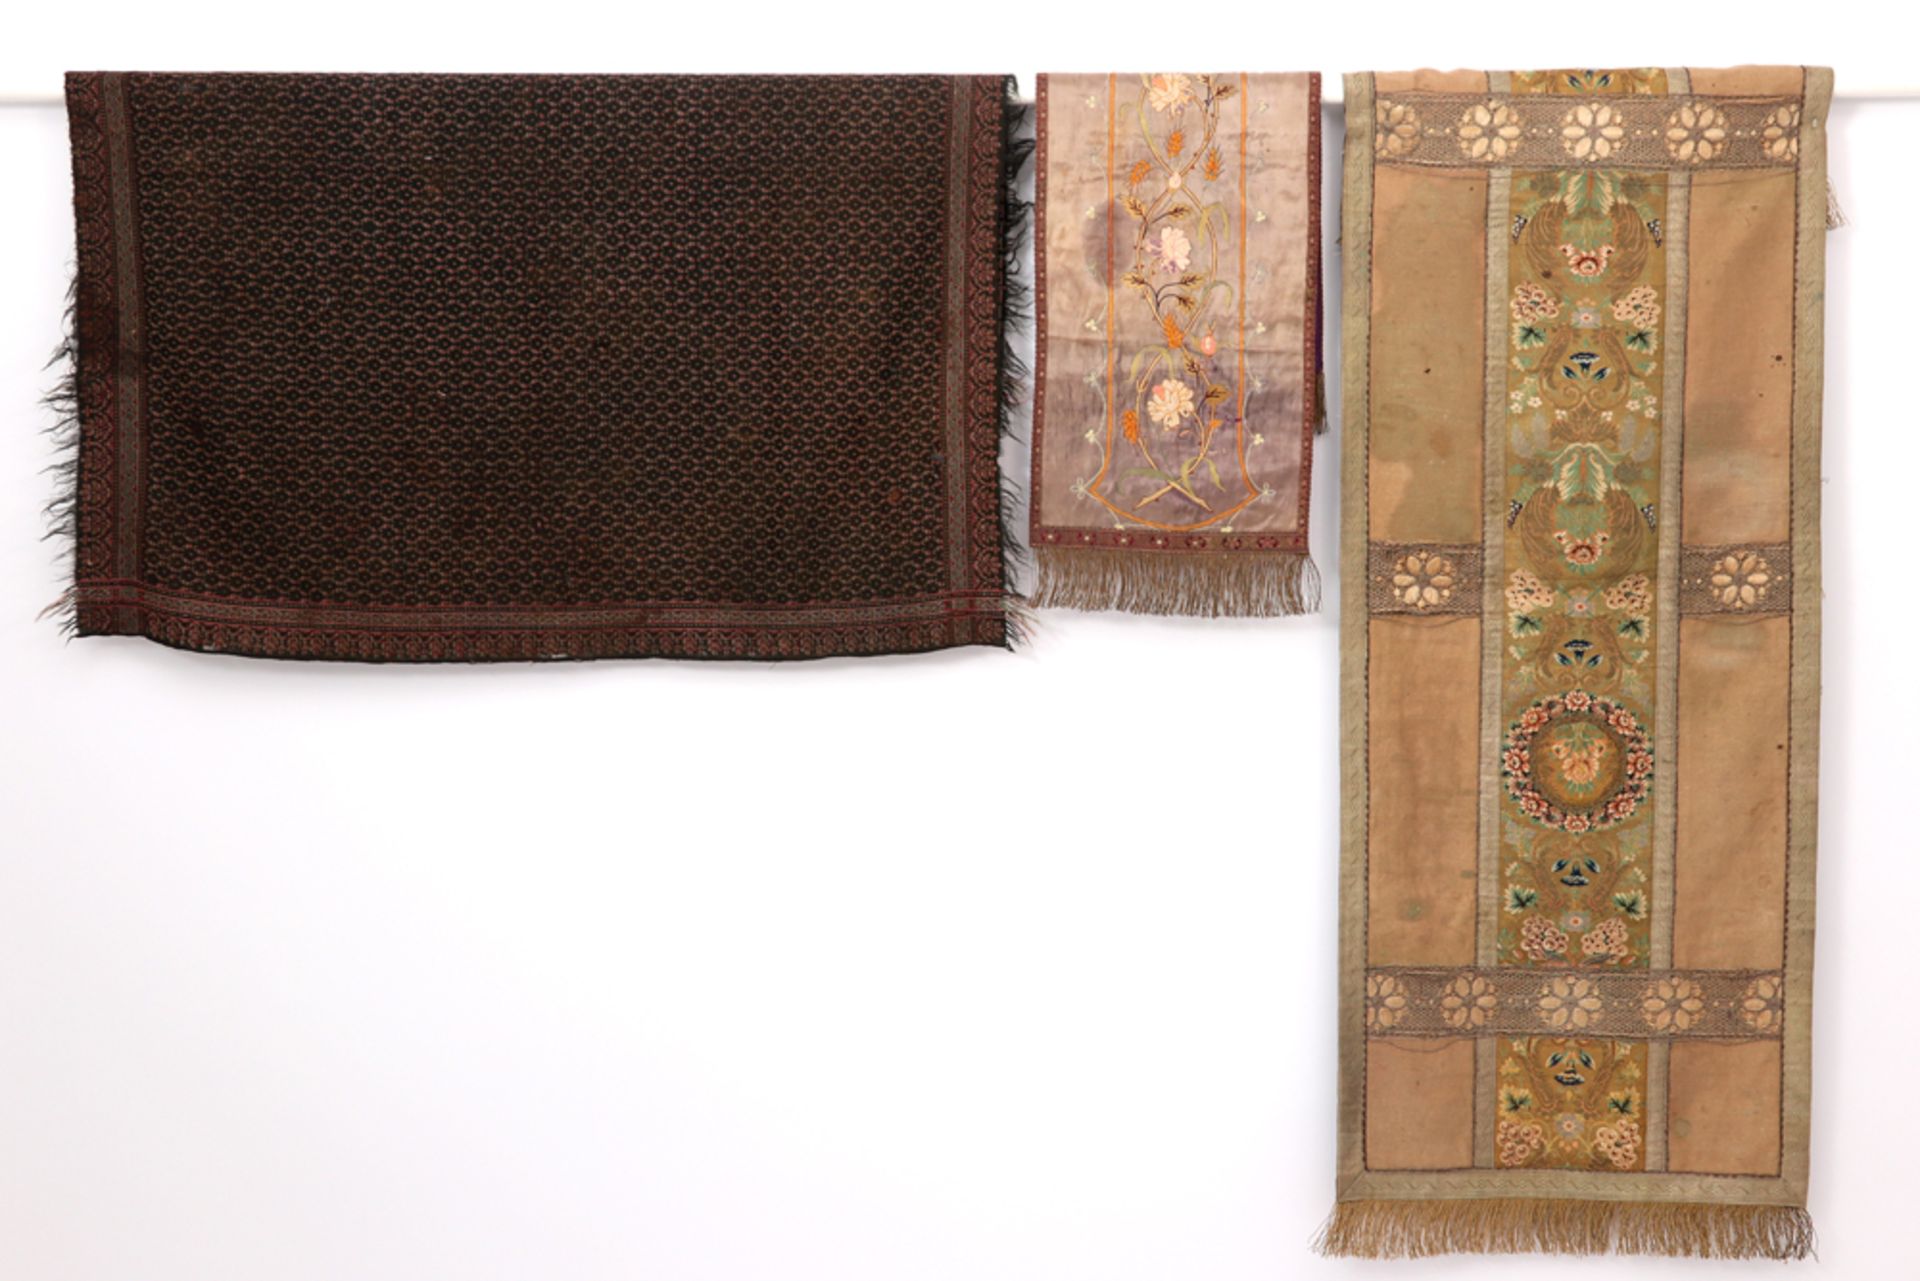 antique and old textile : two European table runners and a Cachemere shawl || Lot antiek en oud